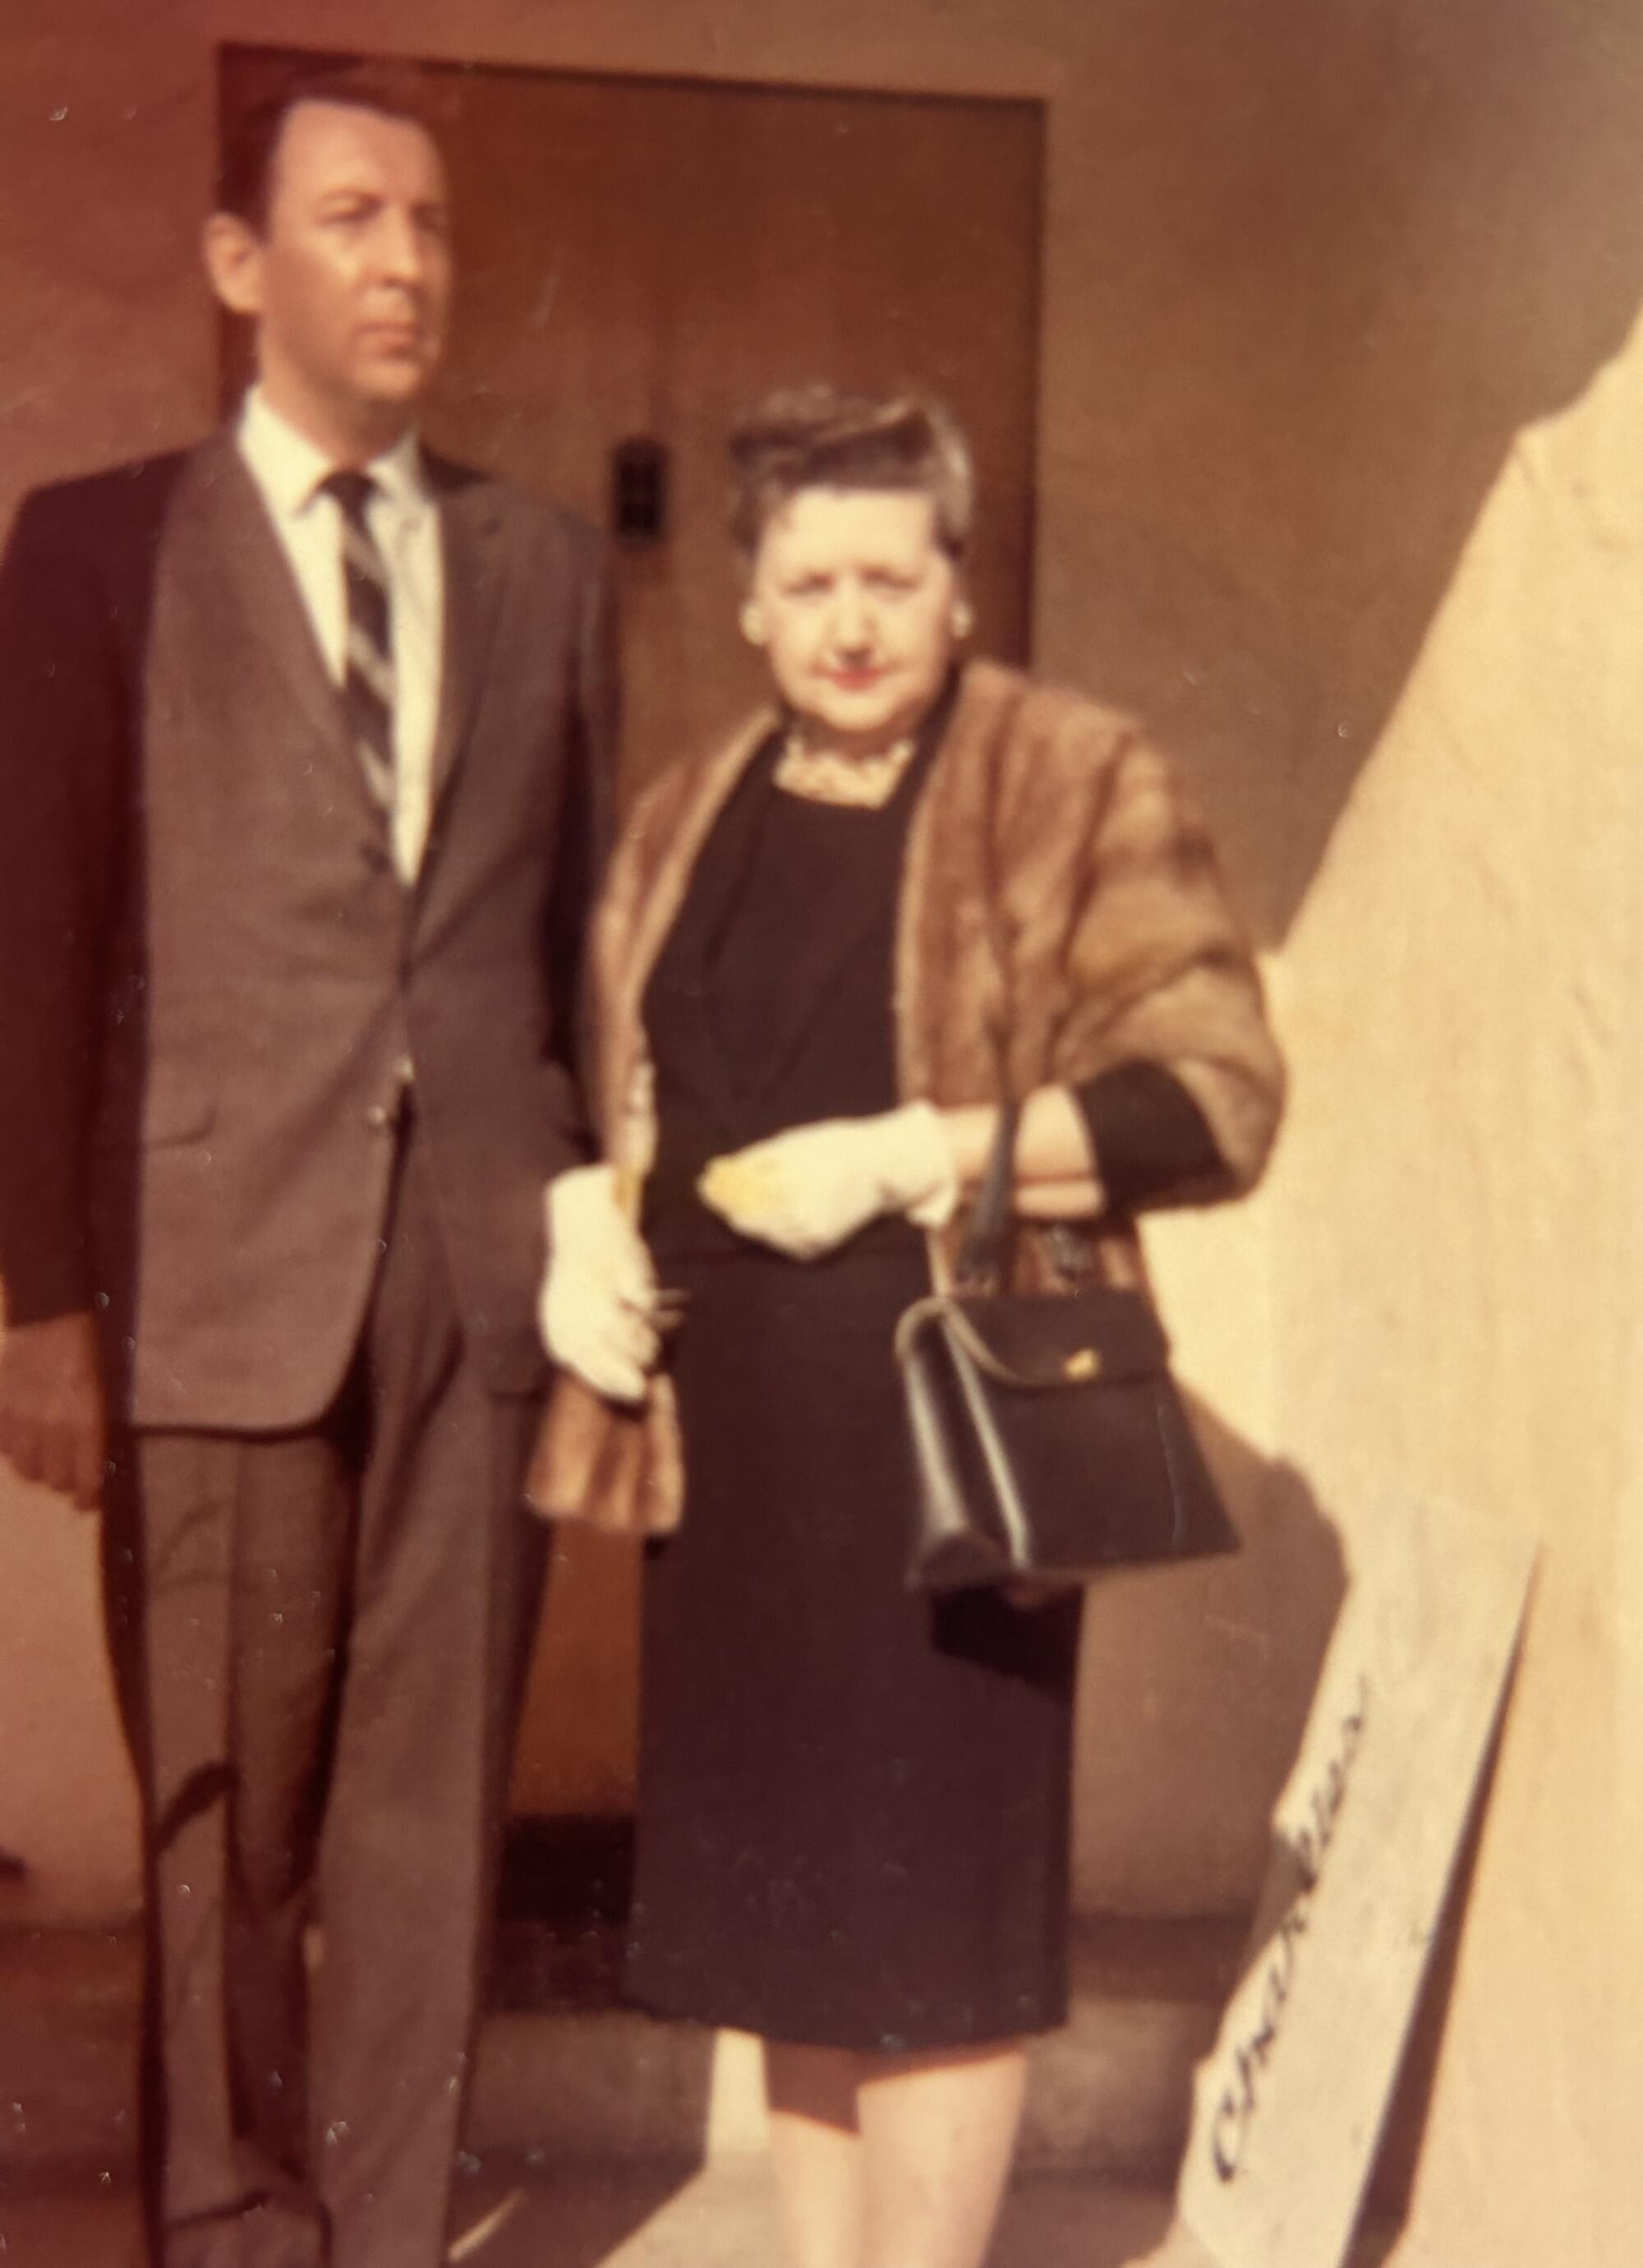 A tall man in a suit and a woman in a fur stole in a sepia-toned photo from the 1950s